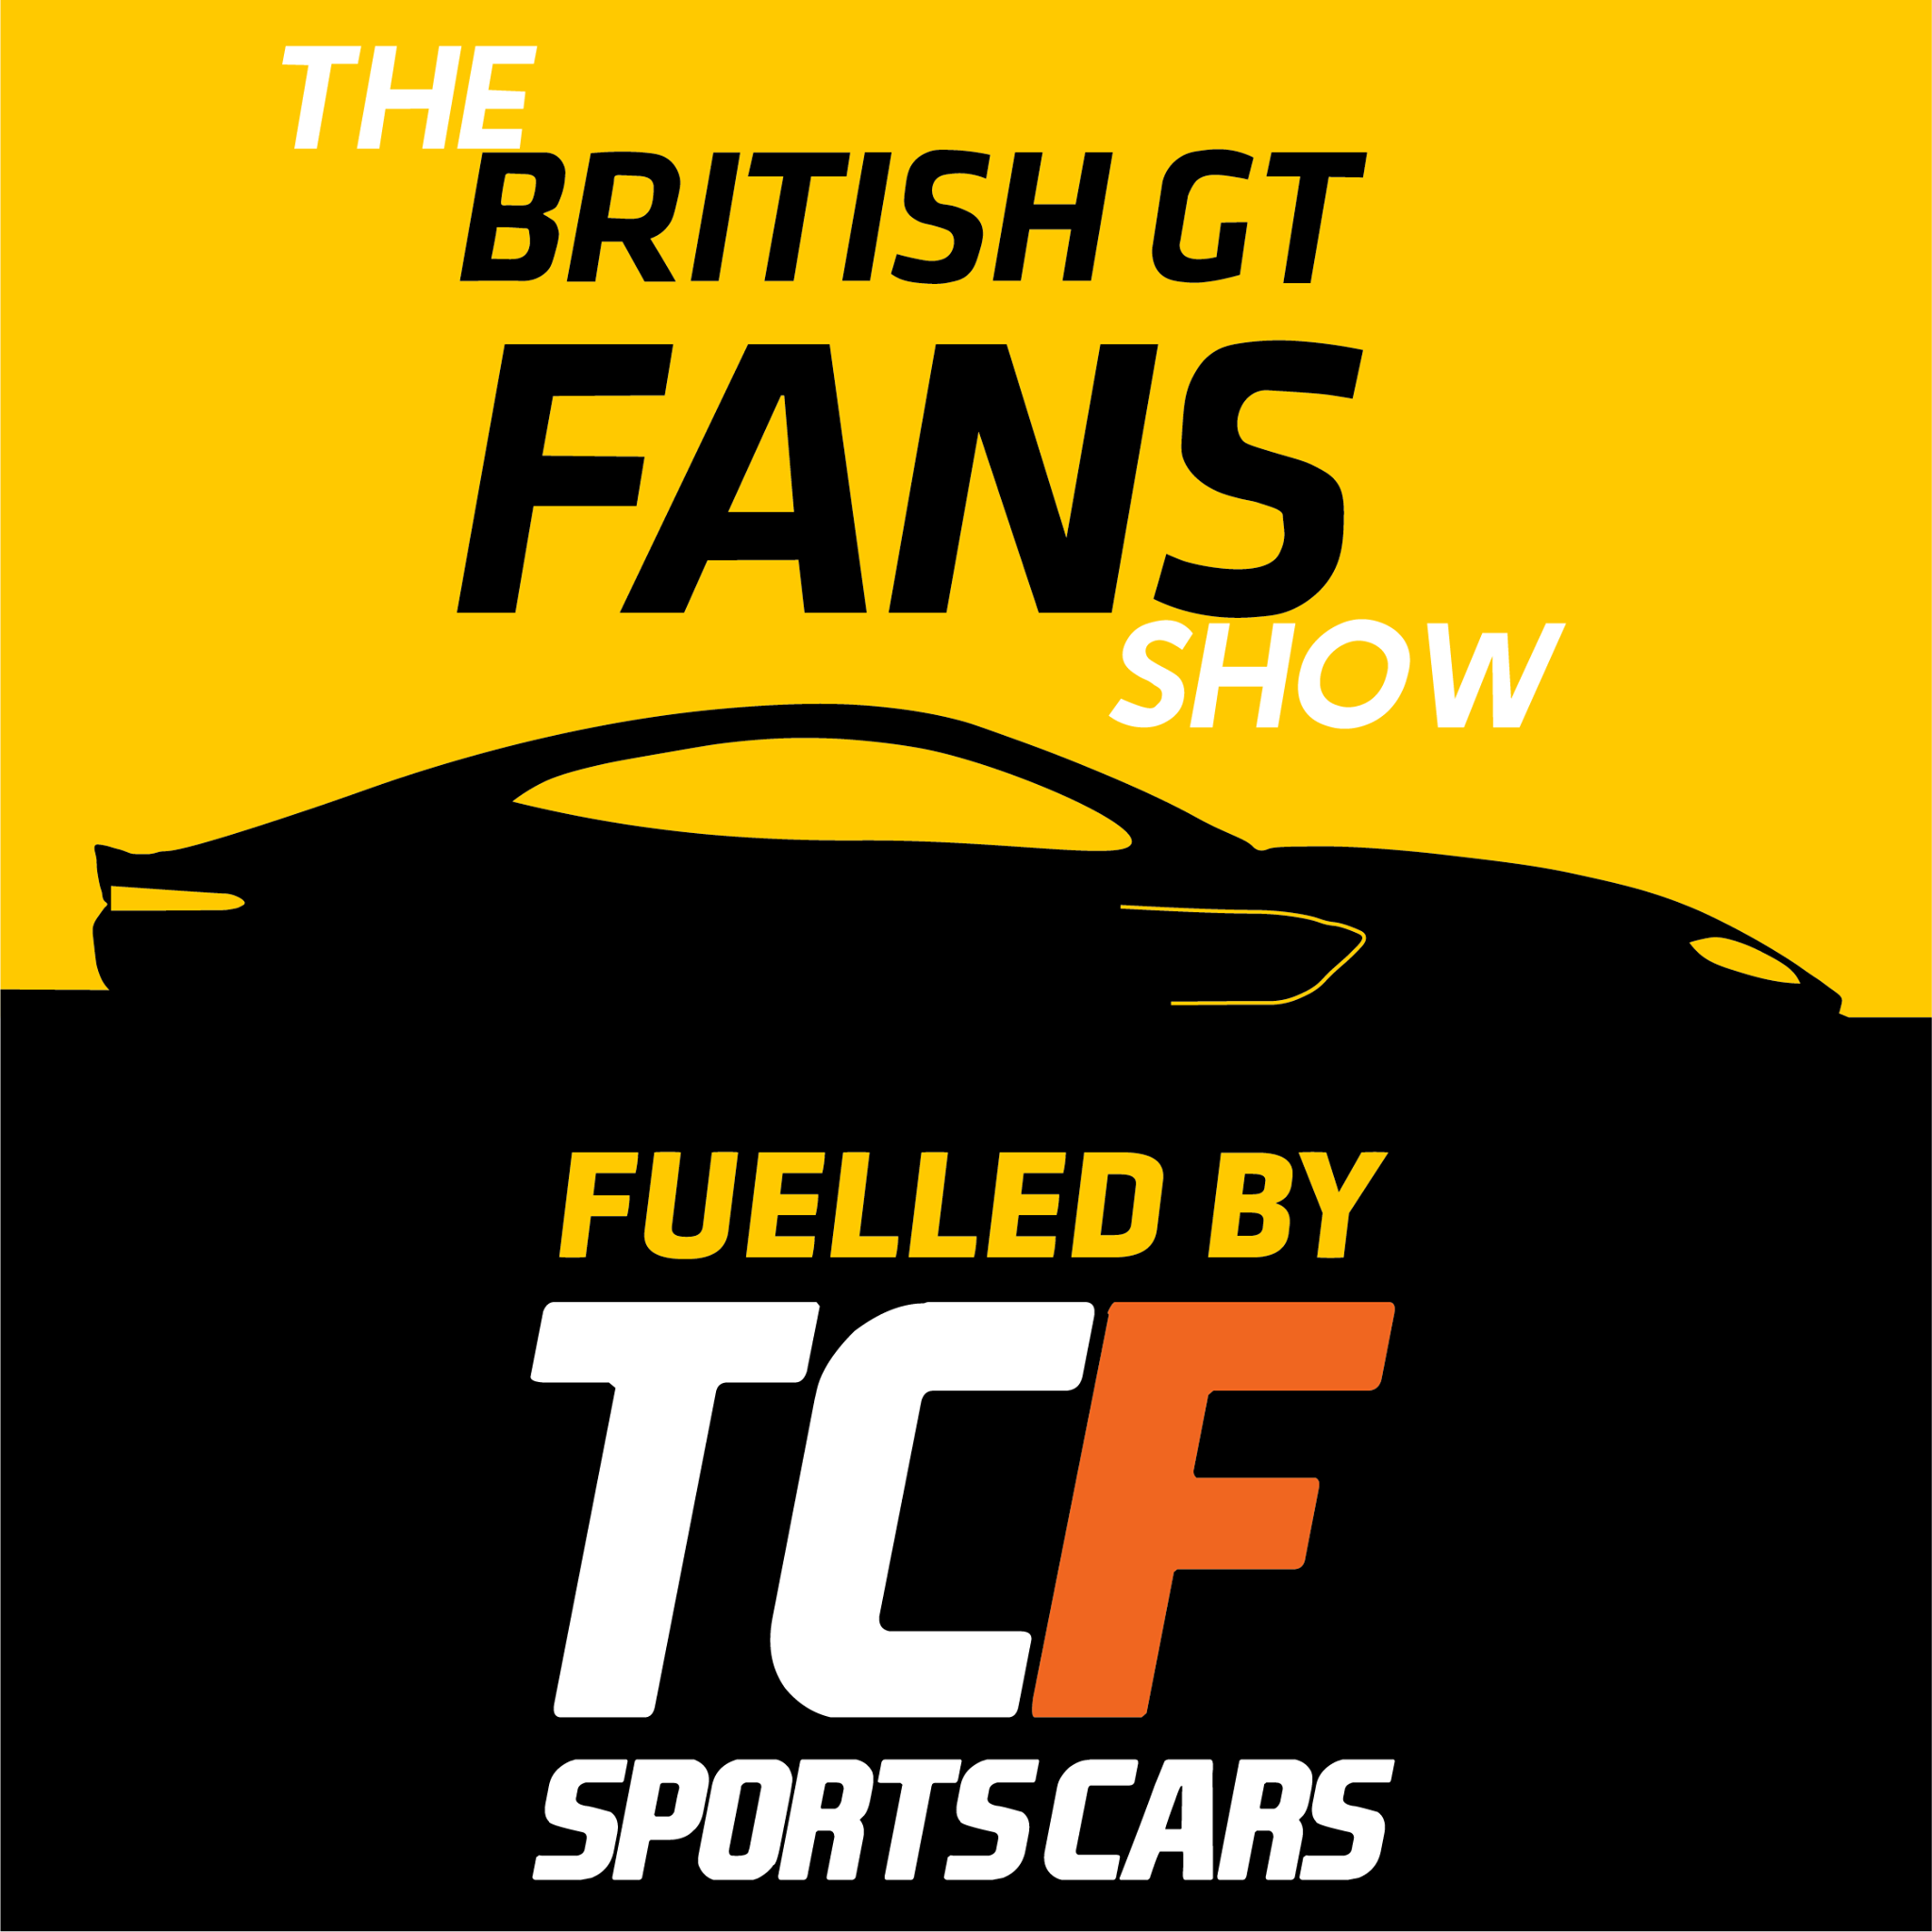 A silhouetted Aston Martin on a yellow upper background with text confirming the new British GT Fans Show Logo featuring our partners TCF Sportscars